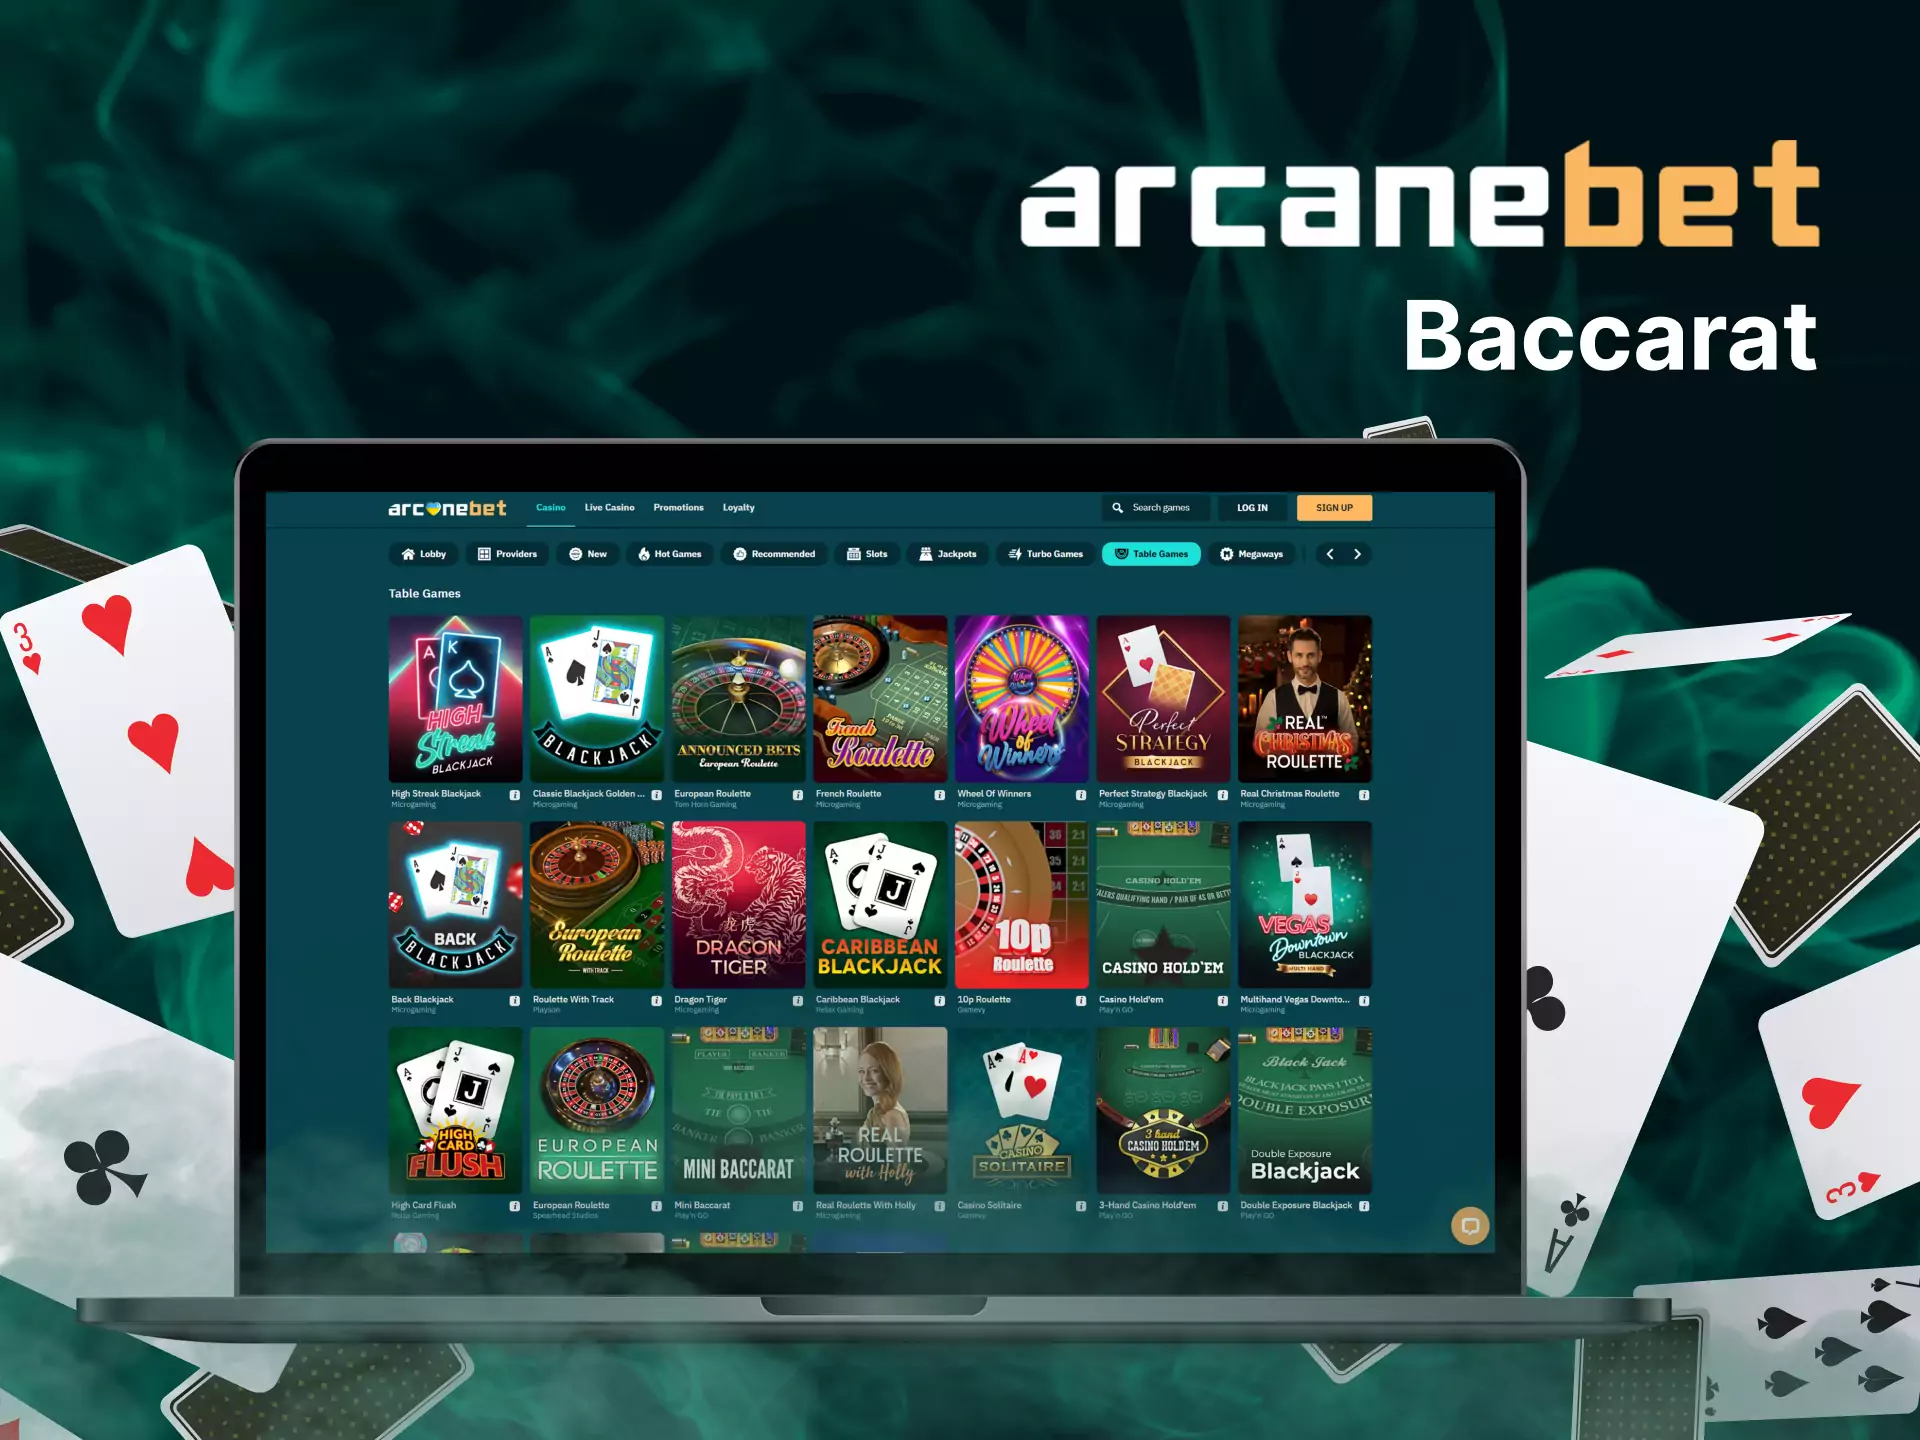 You can play baccarat at the Arcanebet casino.